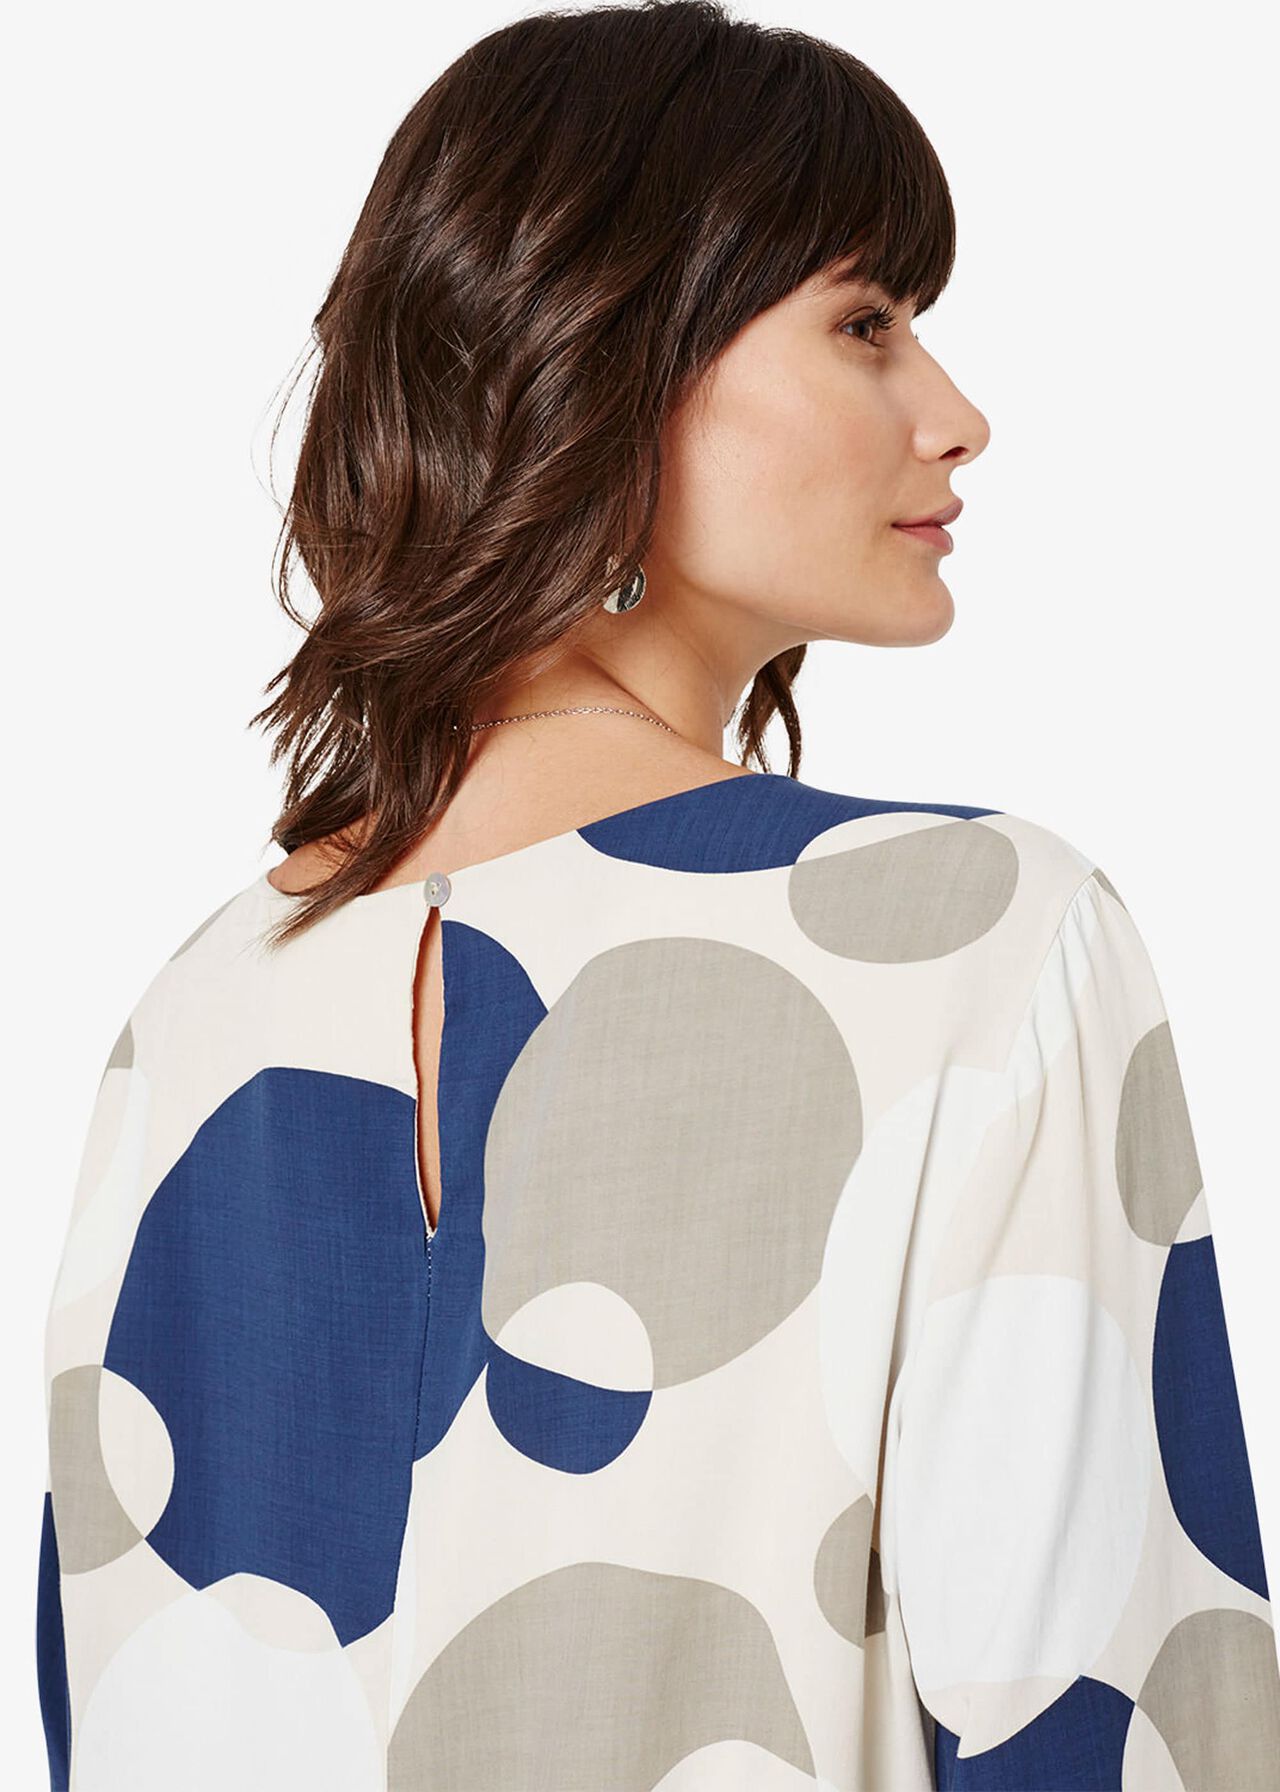 Abstract Spot Blouse